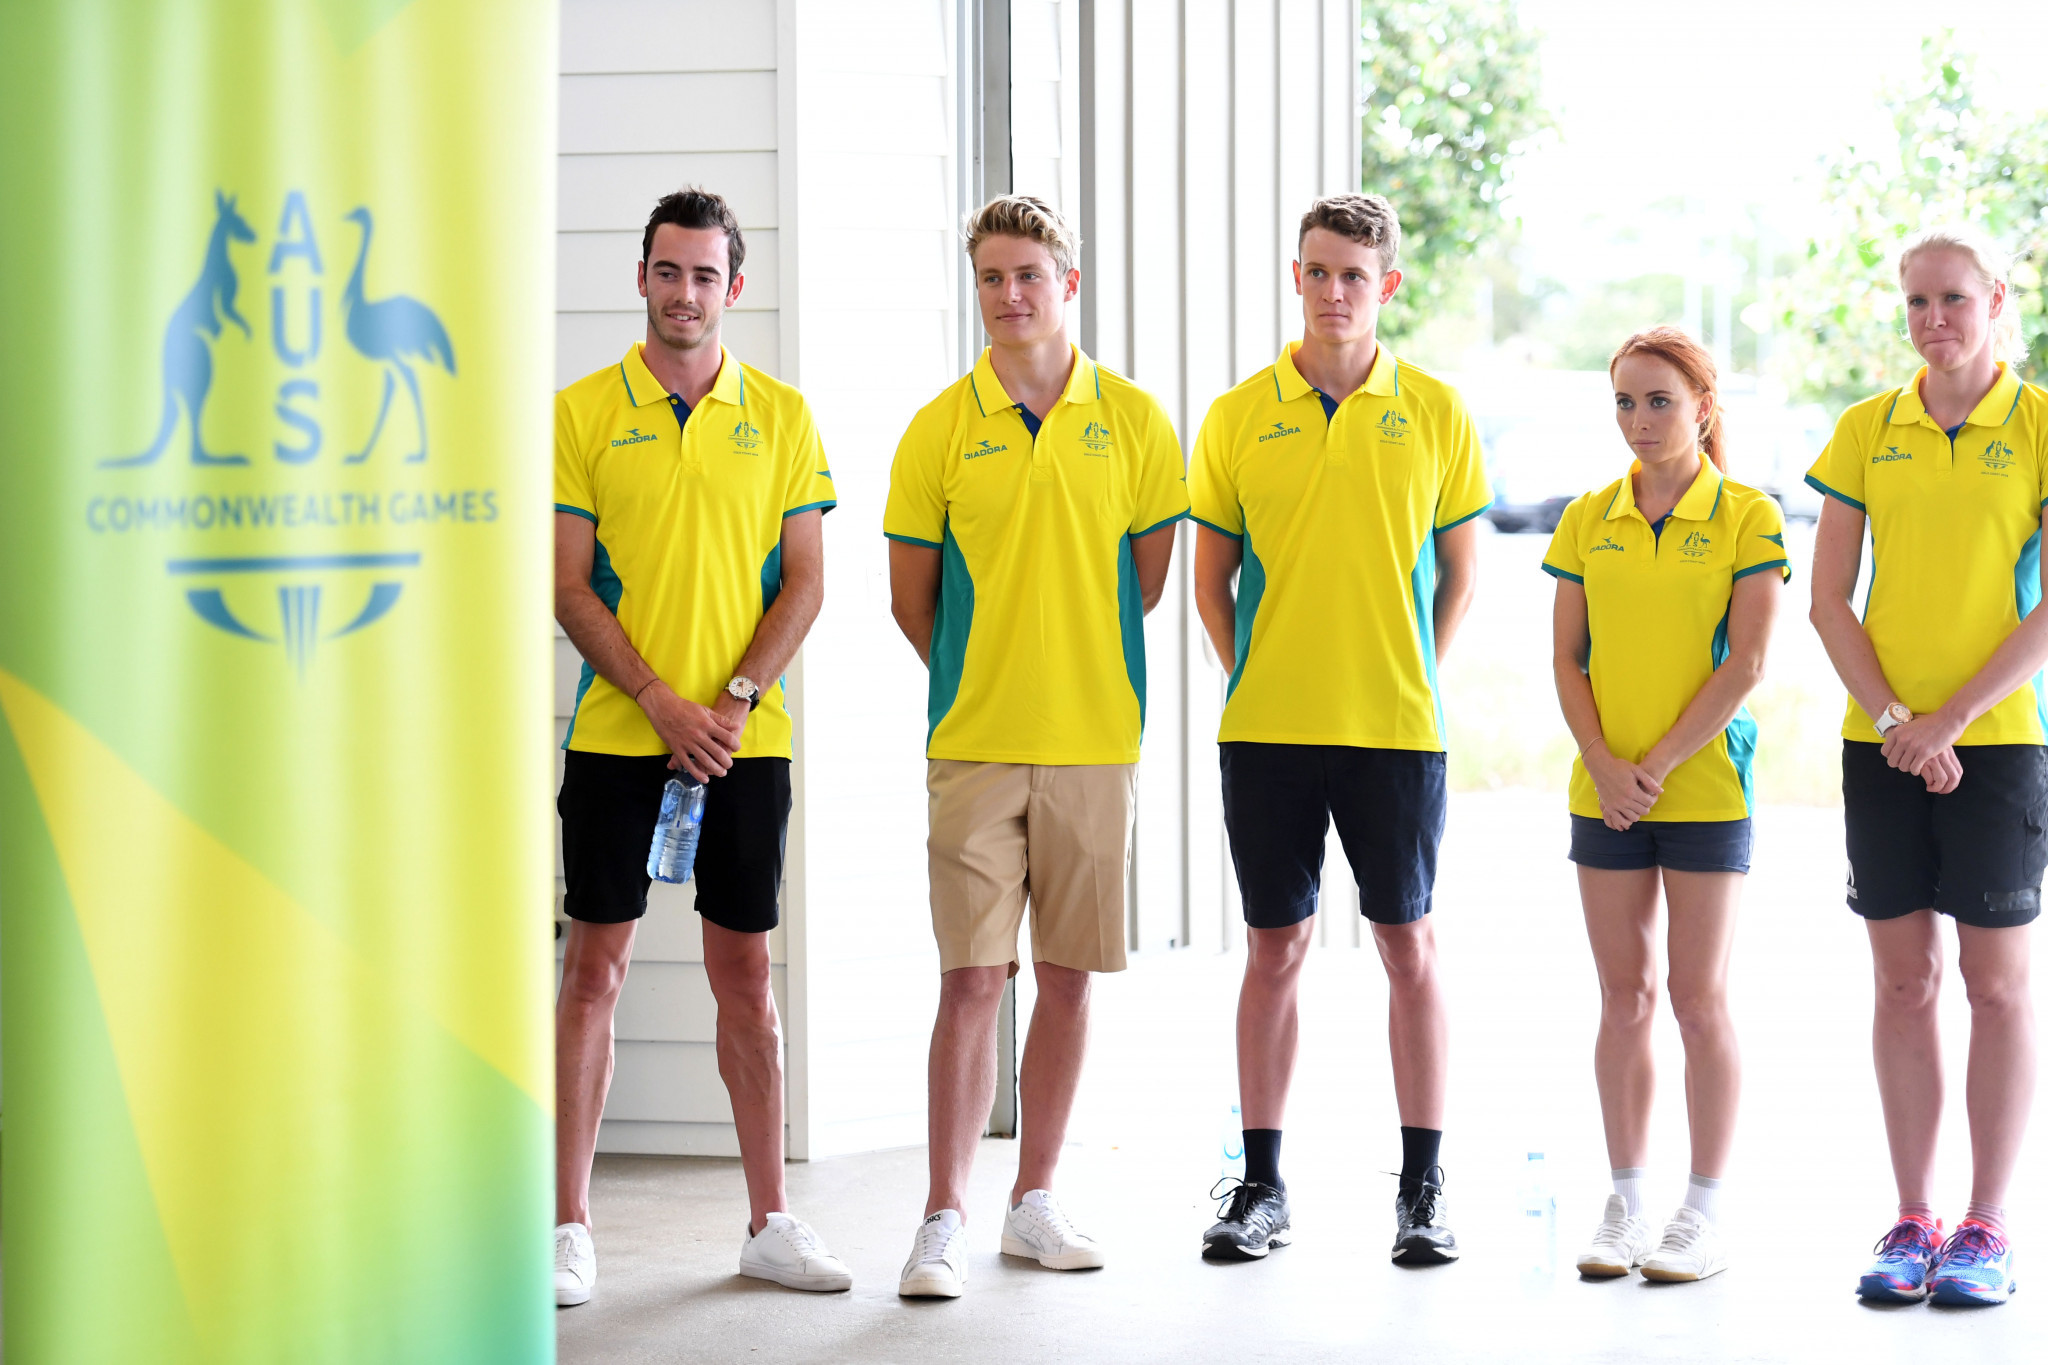 Triathletes named as Australia's first athletes for Gold Coast 2018